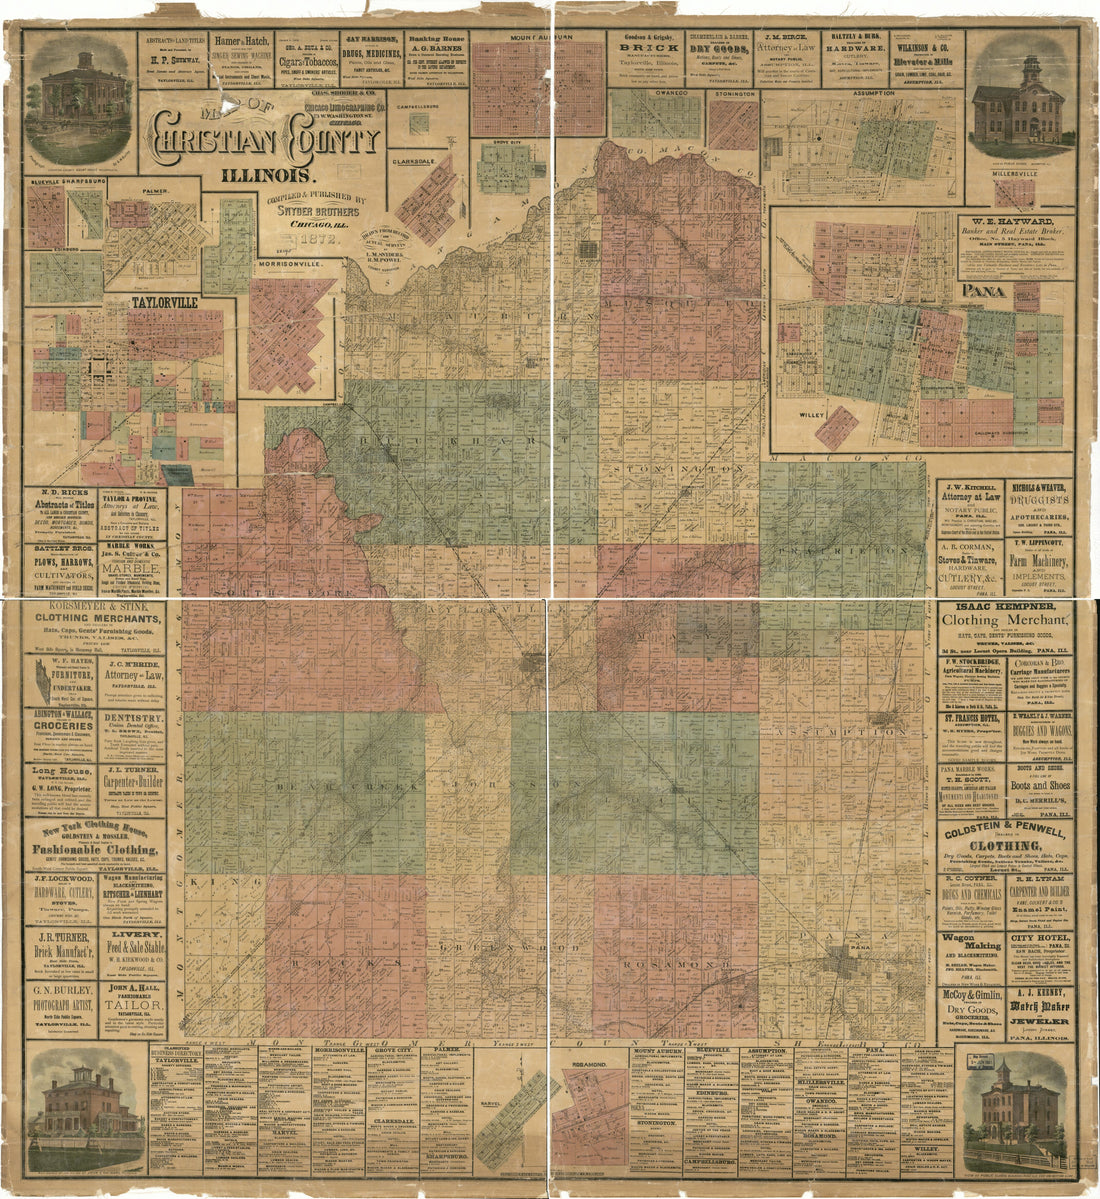 This old map of Map of Christian County, Illinois from 1877 was created by  Snyder Brothers in 1877